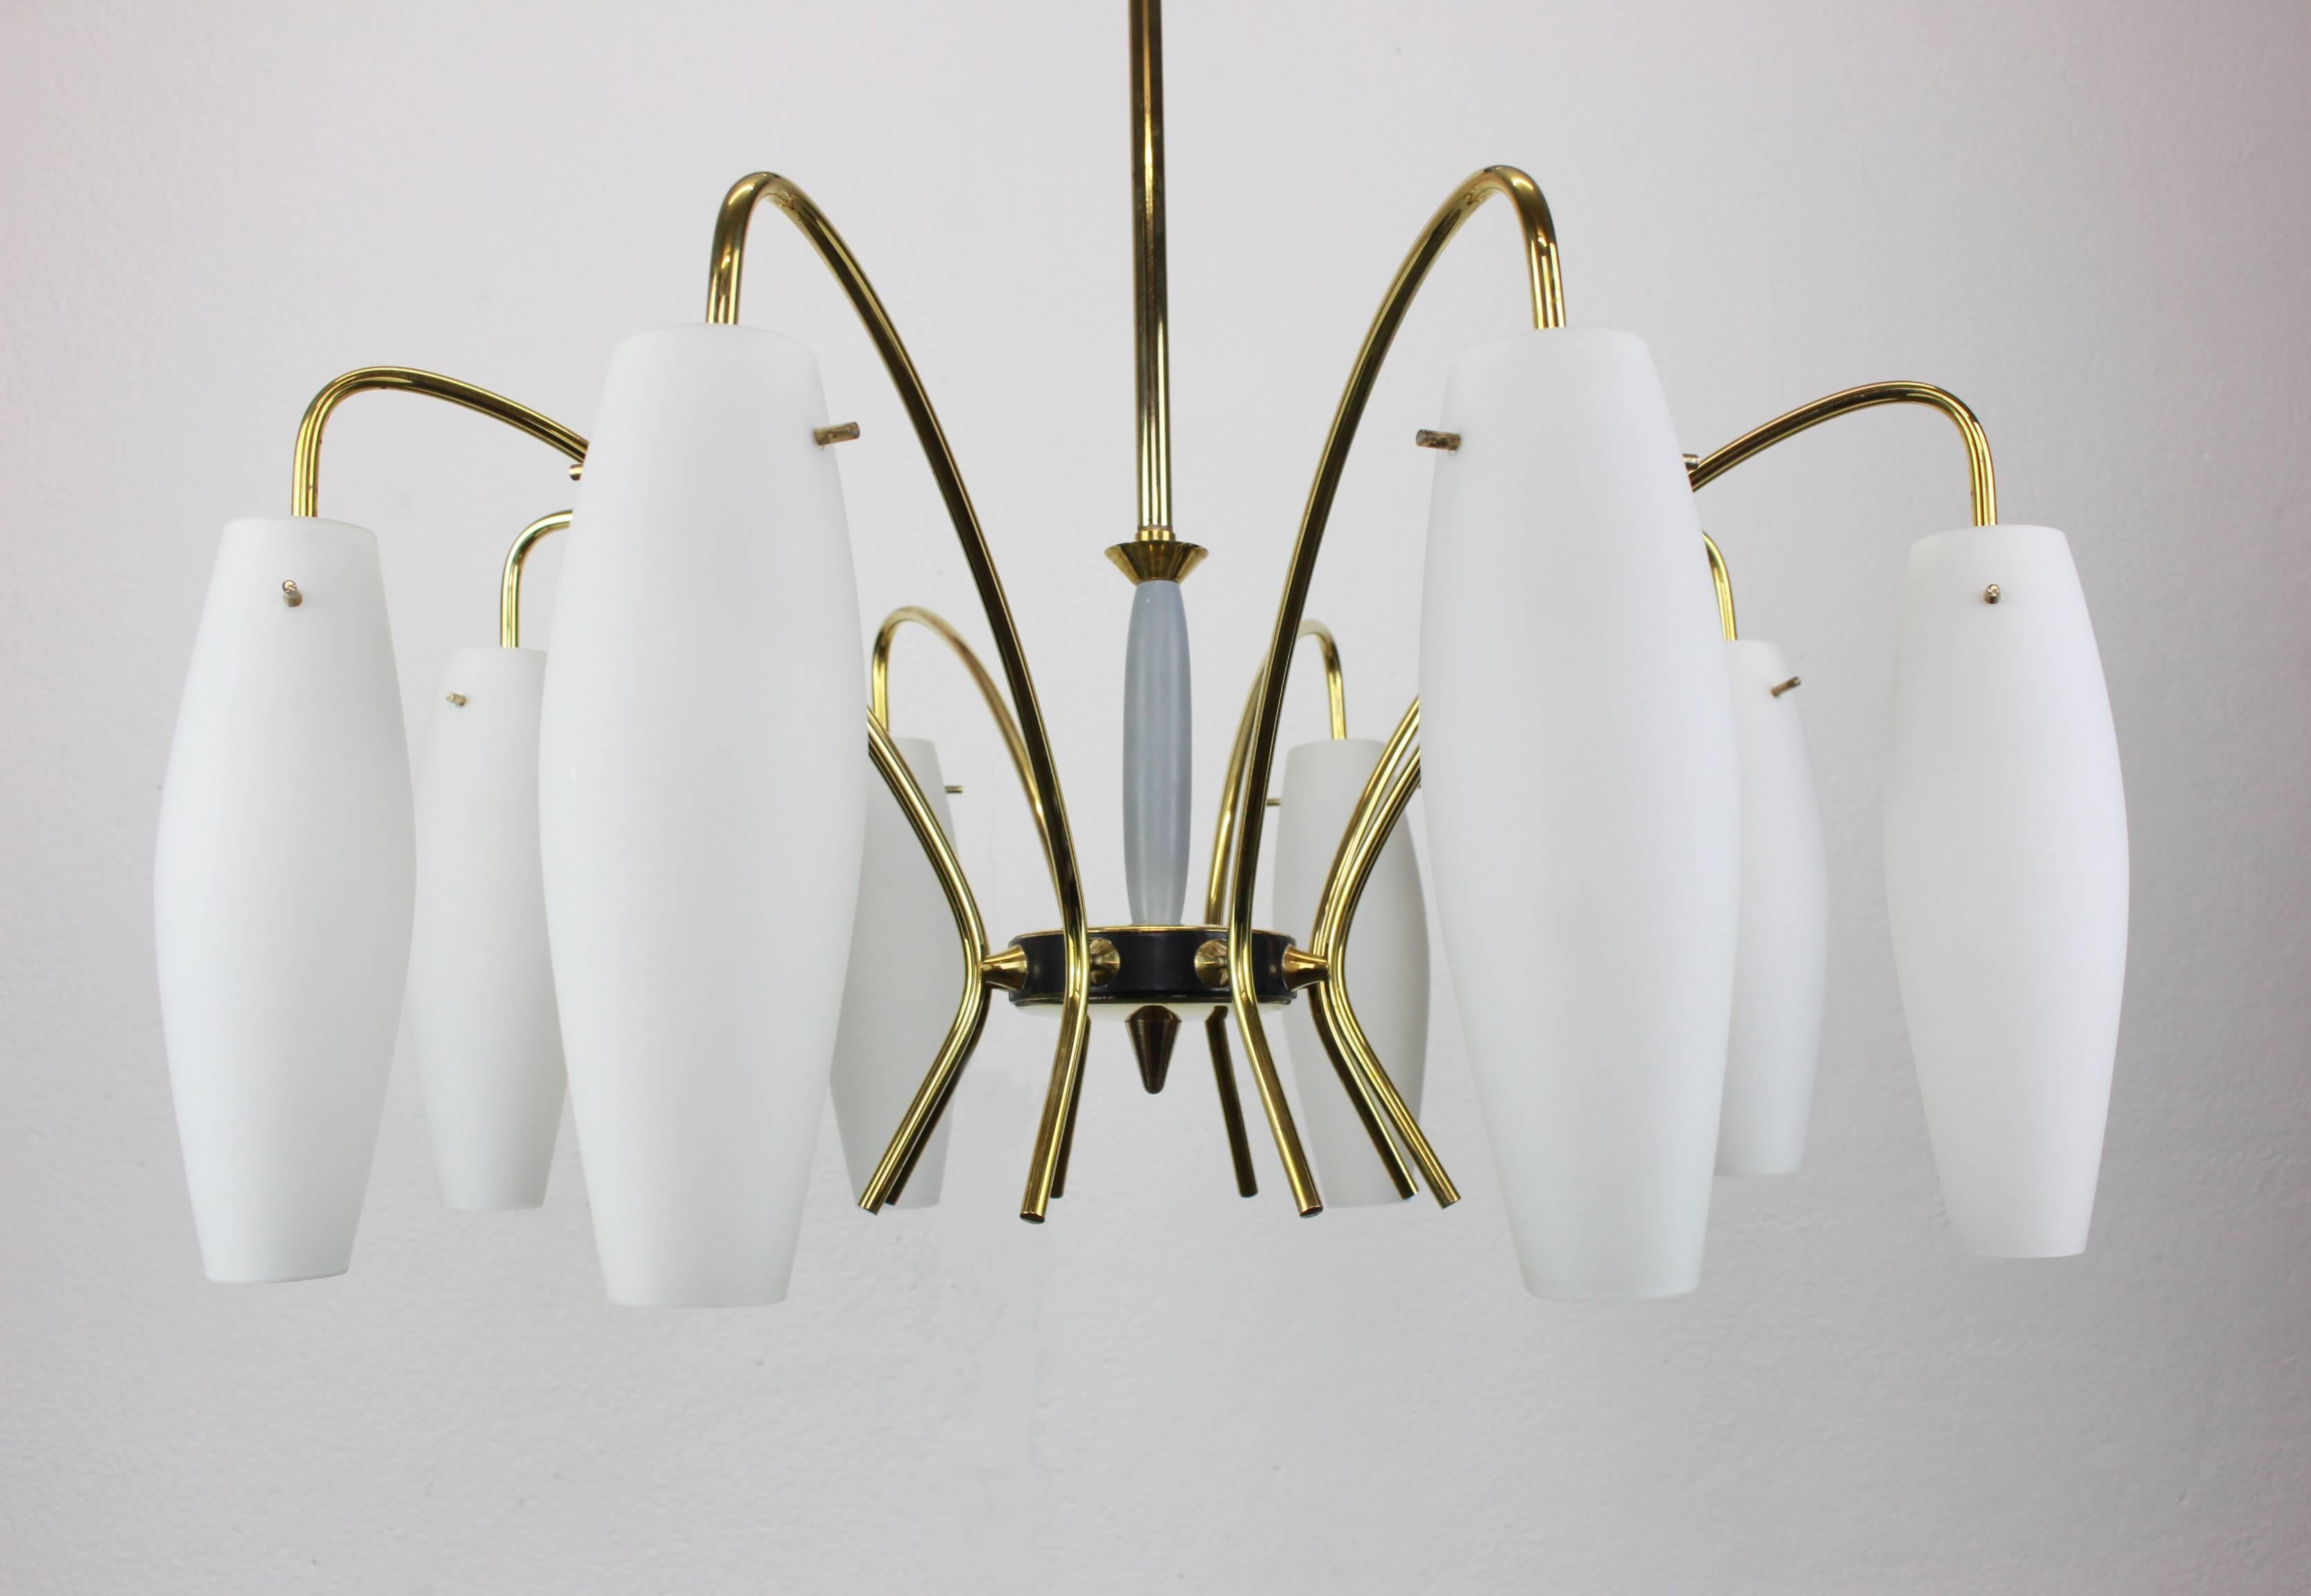 A stunning eight lights chandelier in the manner of Stilnovo, Italy, manufactured in circa 1950-1959. A handmade and high-quality piece.

High quality and in very good condition. Cleaned, well-wired and ready to use. 

The fixture requires 8 x